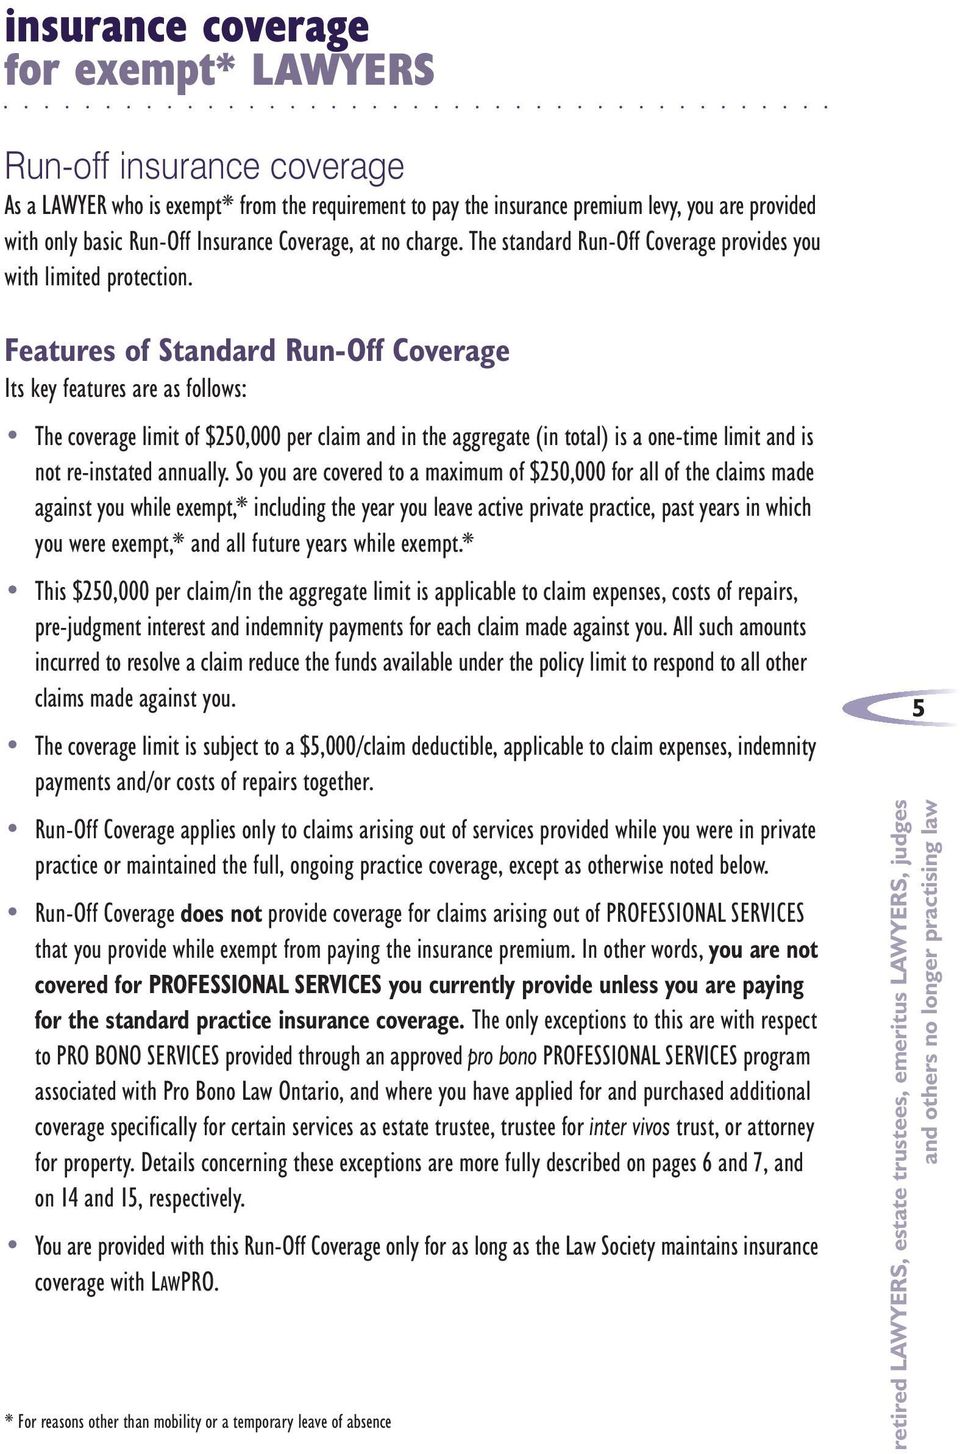 Features of Standard Run-Off Coverage Its key features are as follows: The coverage limit of $250,000 per claim and in the aggregate (in total) is a one-time limit and is not re-instated annually.